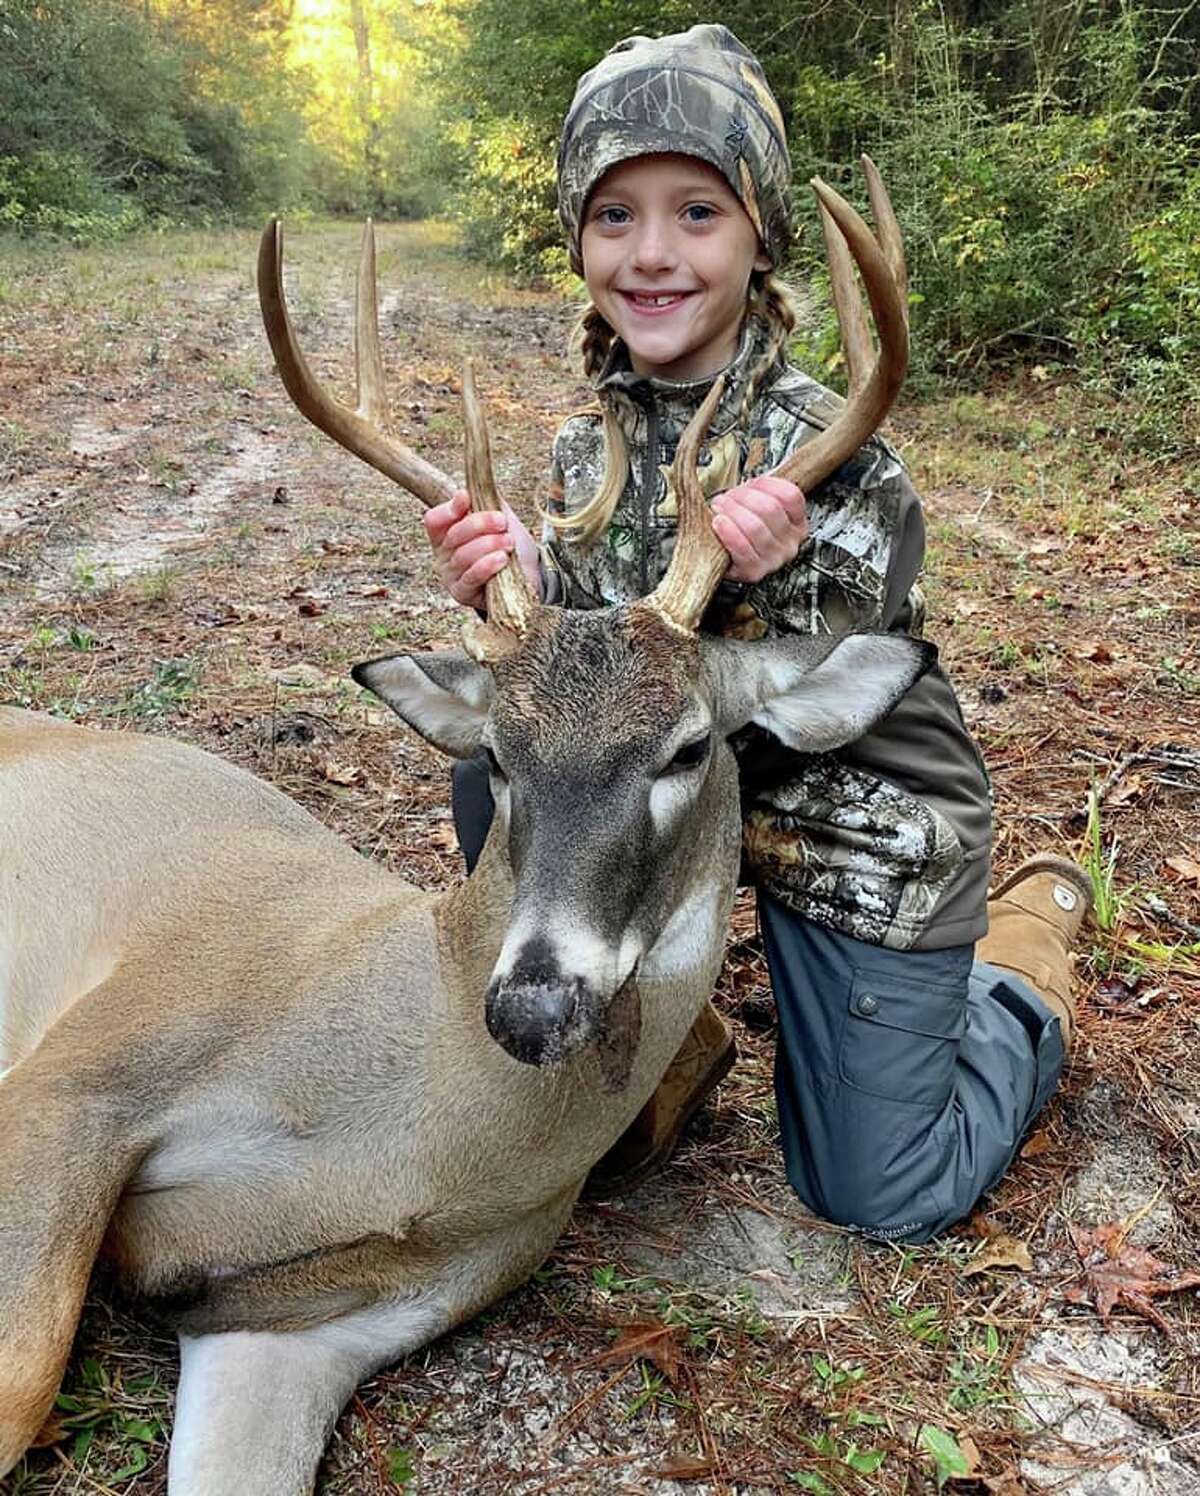 PHOTOS: Houston kids' prized killsYouth hunting season is officially under way in Texas after the Texas Parks and Wildlife Department's Youth Only open seasons for duck, turkey and white-tailed deer kicked off last weekend. >>>See the latest photos of Houston-area kids showing off their prized kills... Courtesy Clint Lyndsay Richardson/Facebook